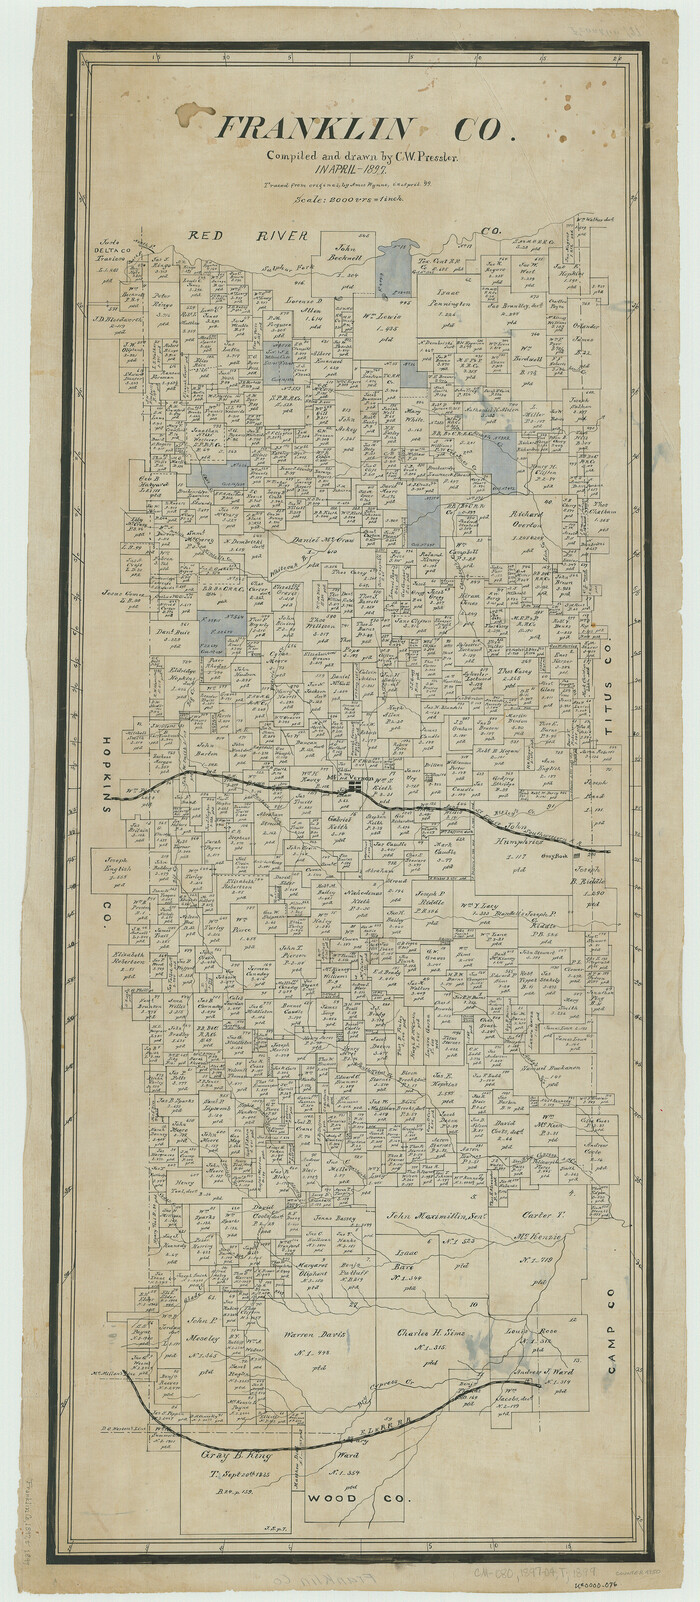 4950, Franklin Co., General Map Collection